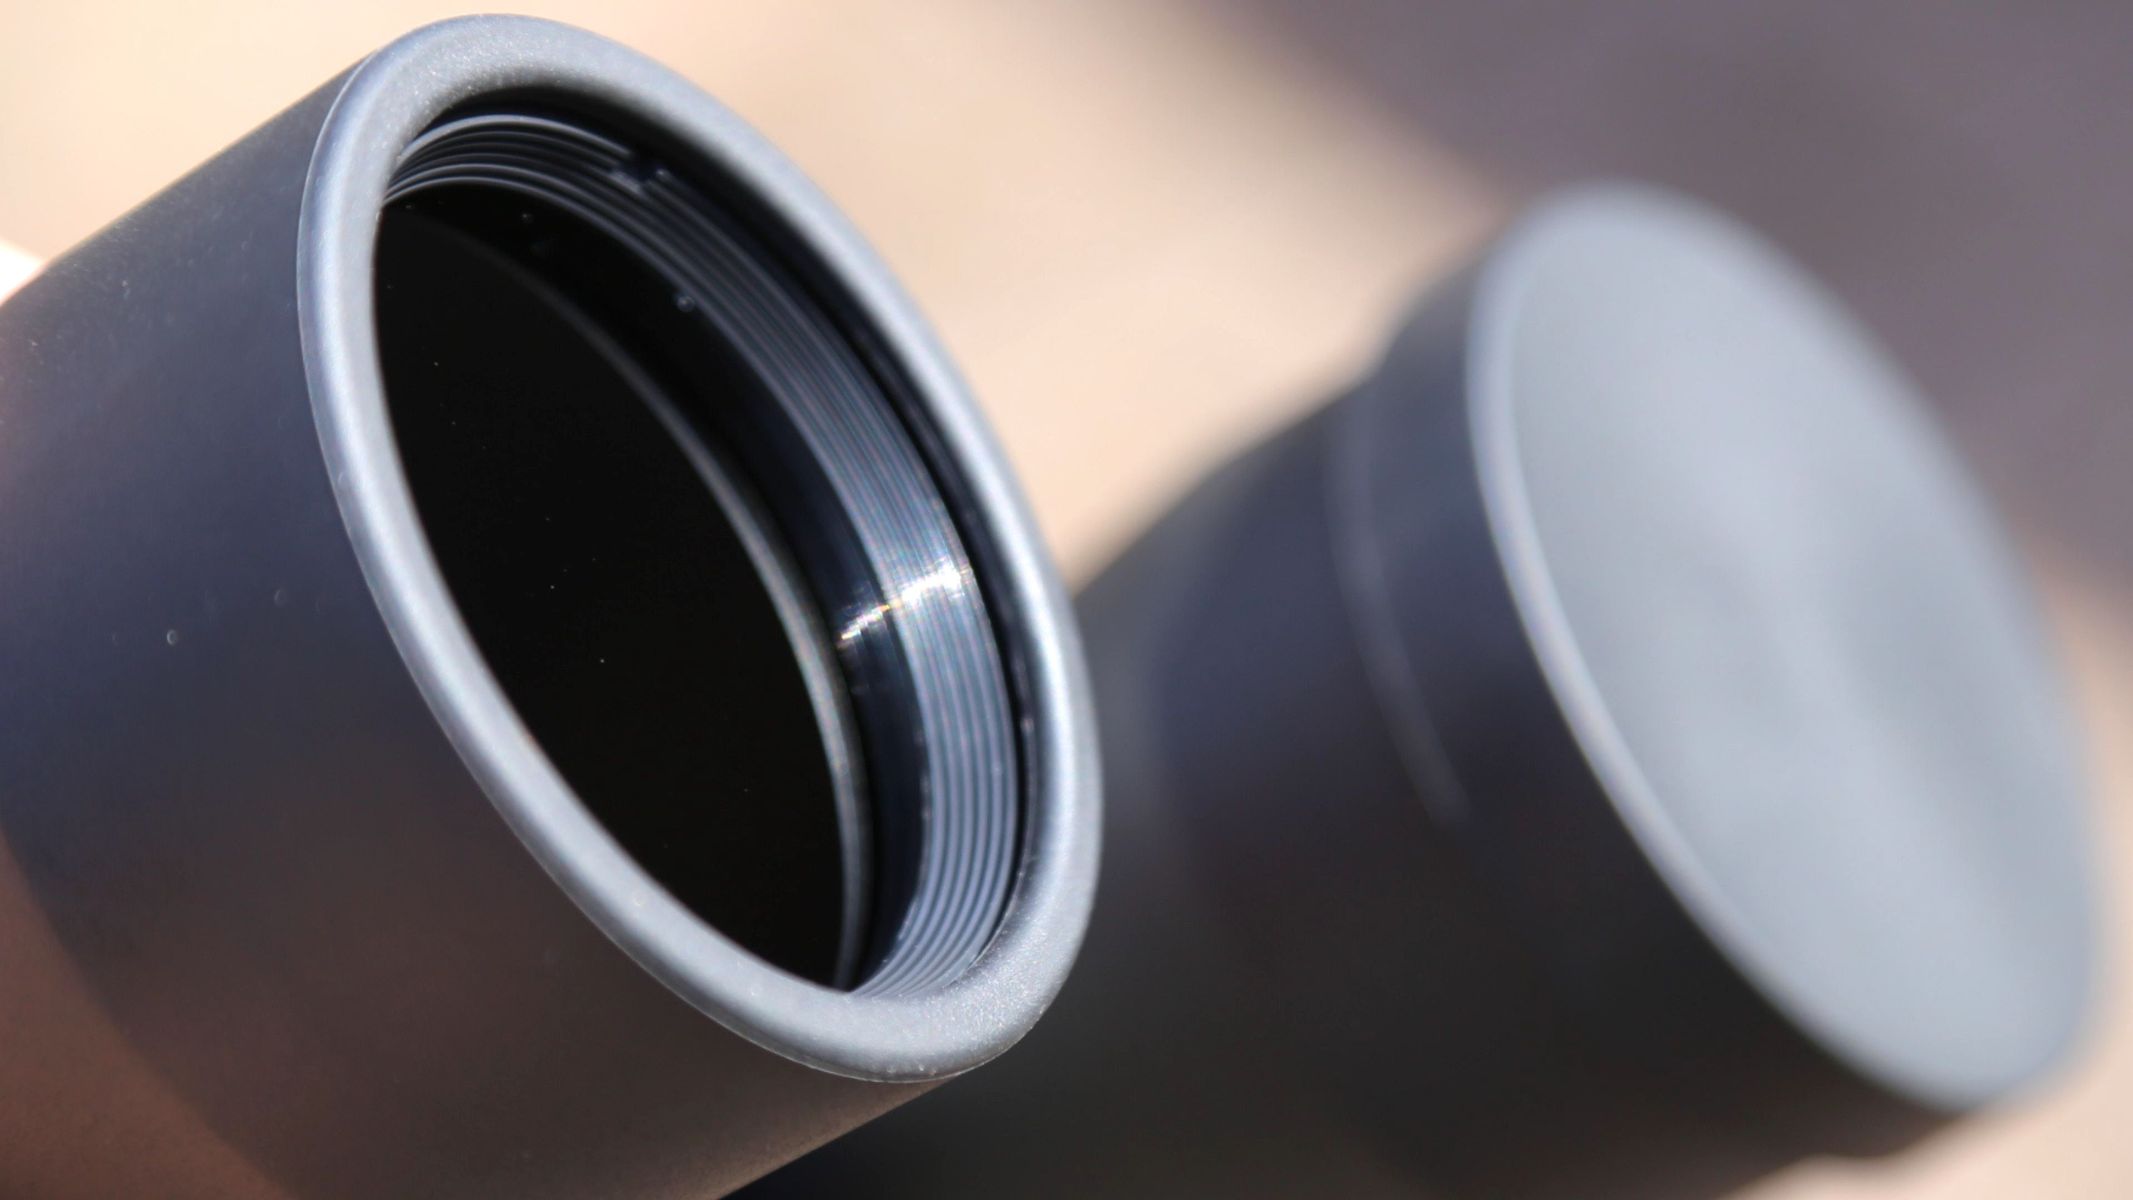 View of objective lenses on the EclipSmart 12x50 binoculars